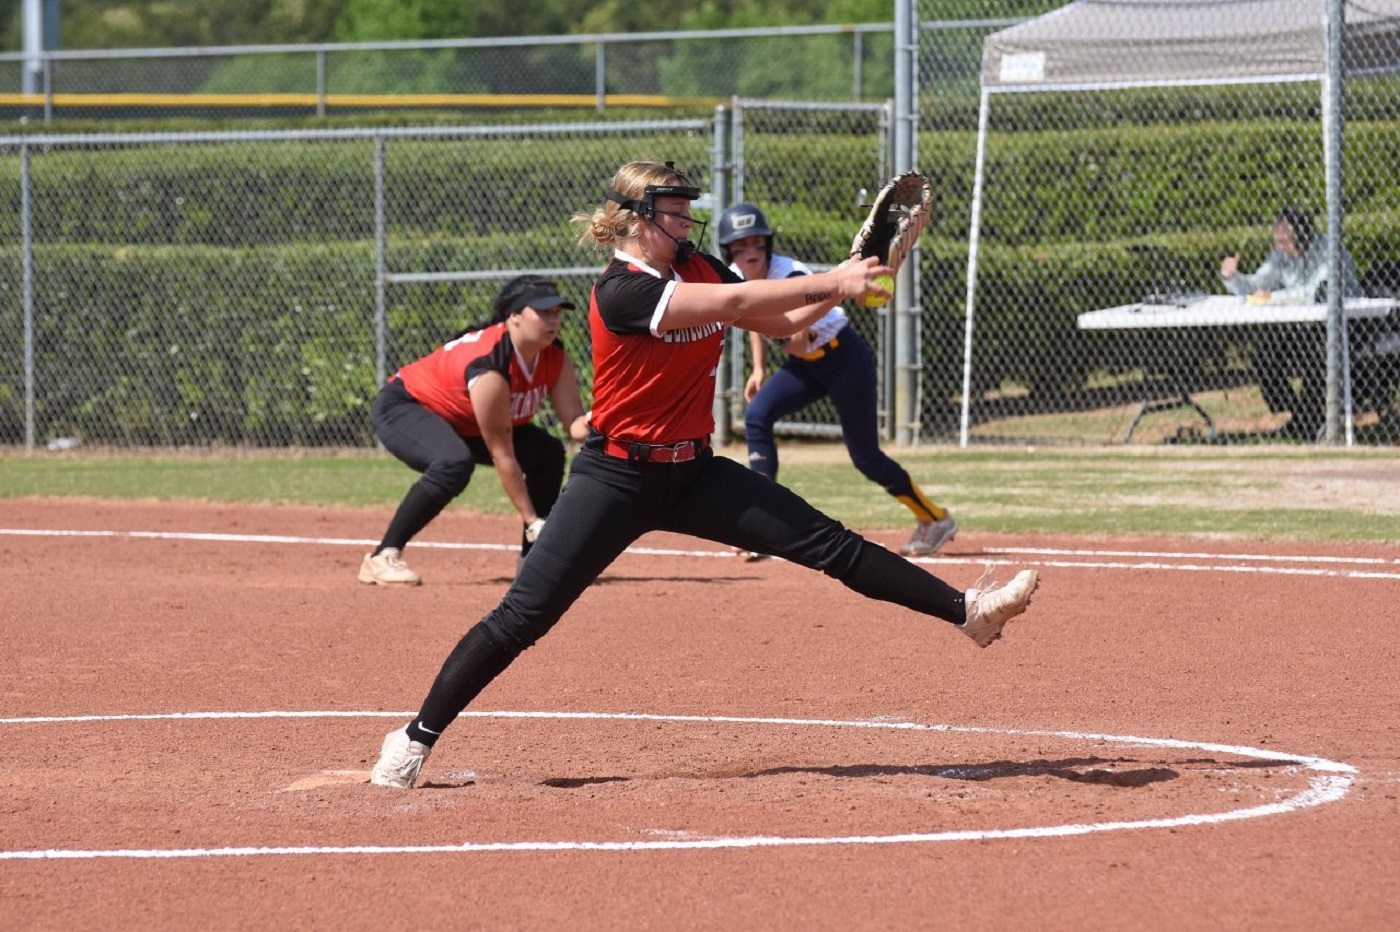 Maddie Cieczka leads the Cardinals to a win in game one 7-1 over Carolina University Photo credit: ProShot Studios